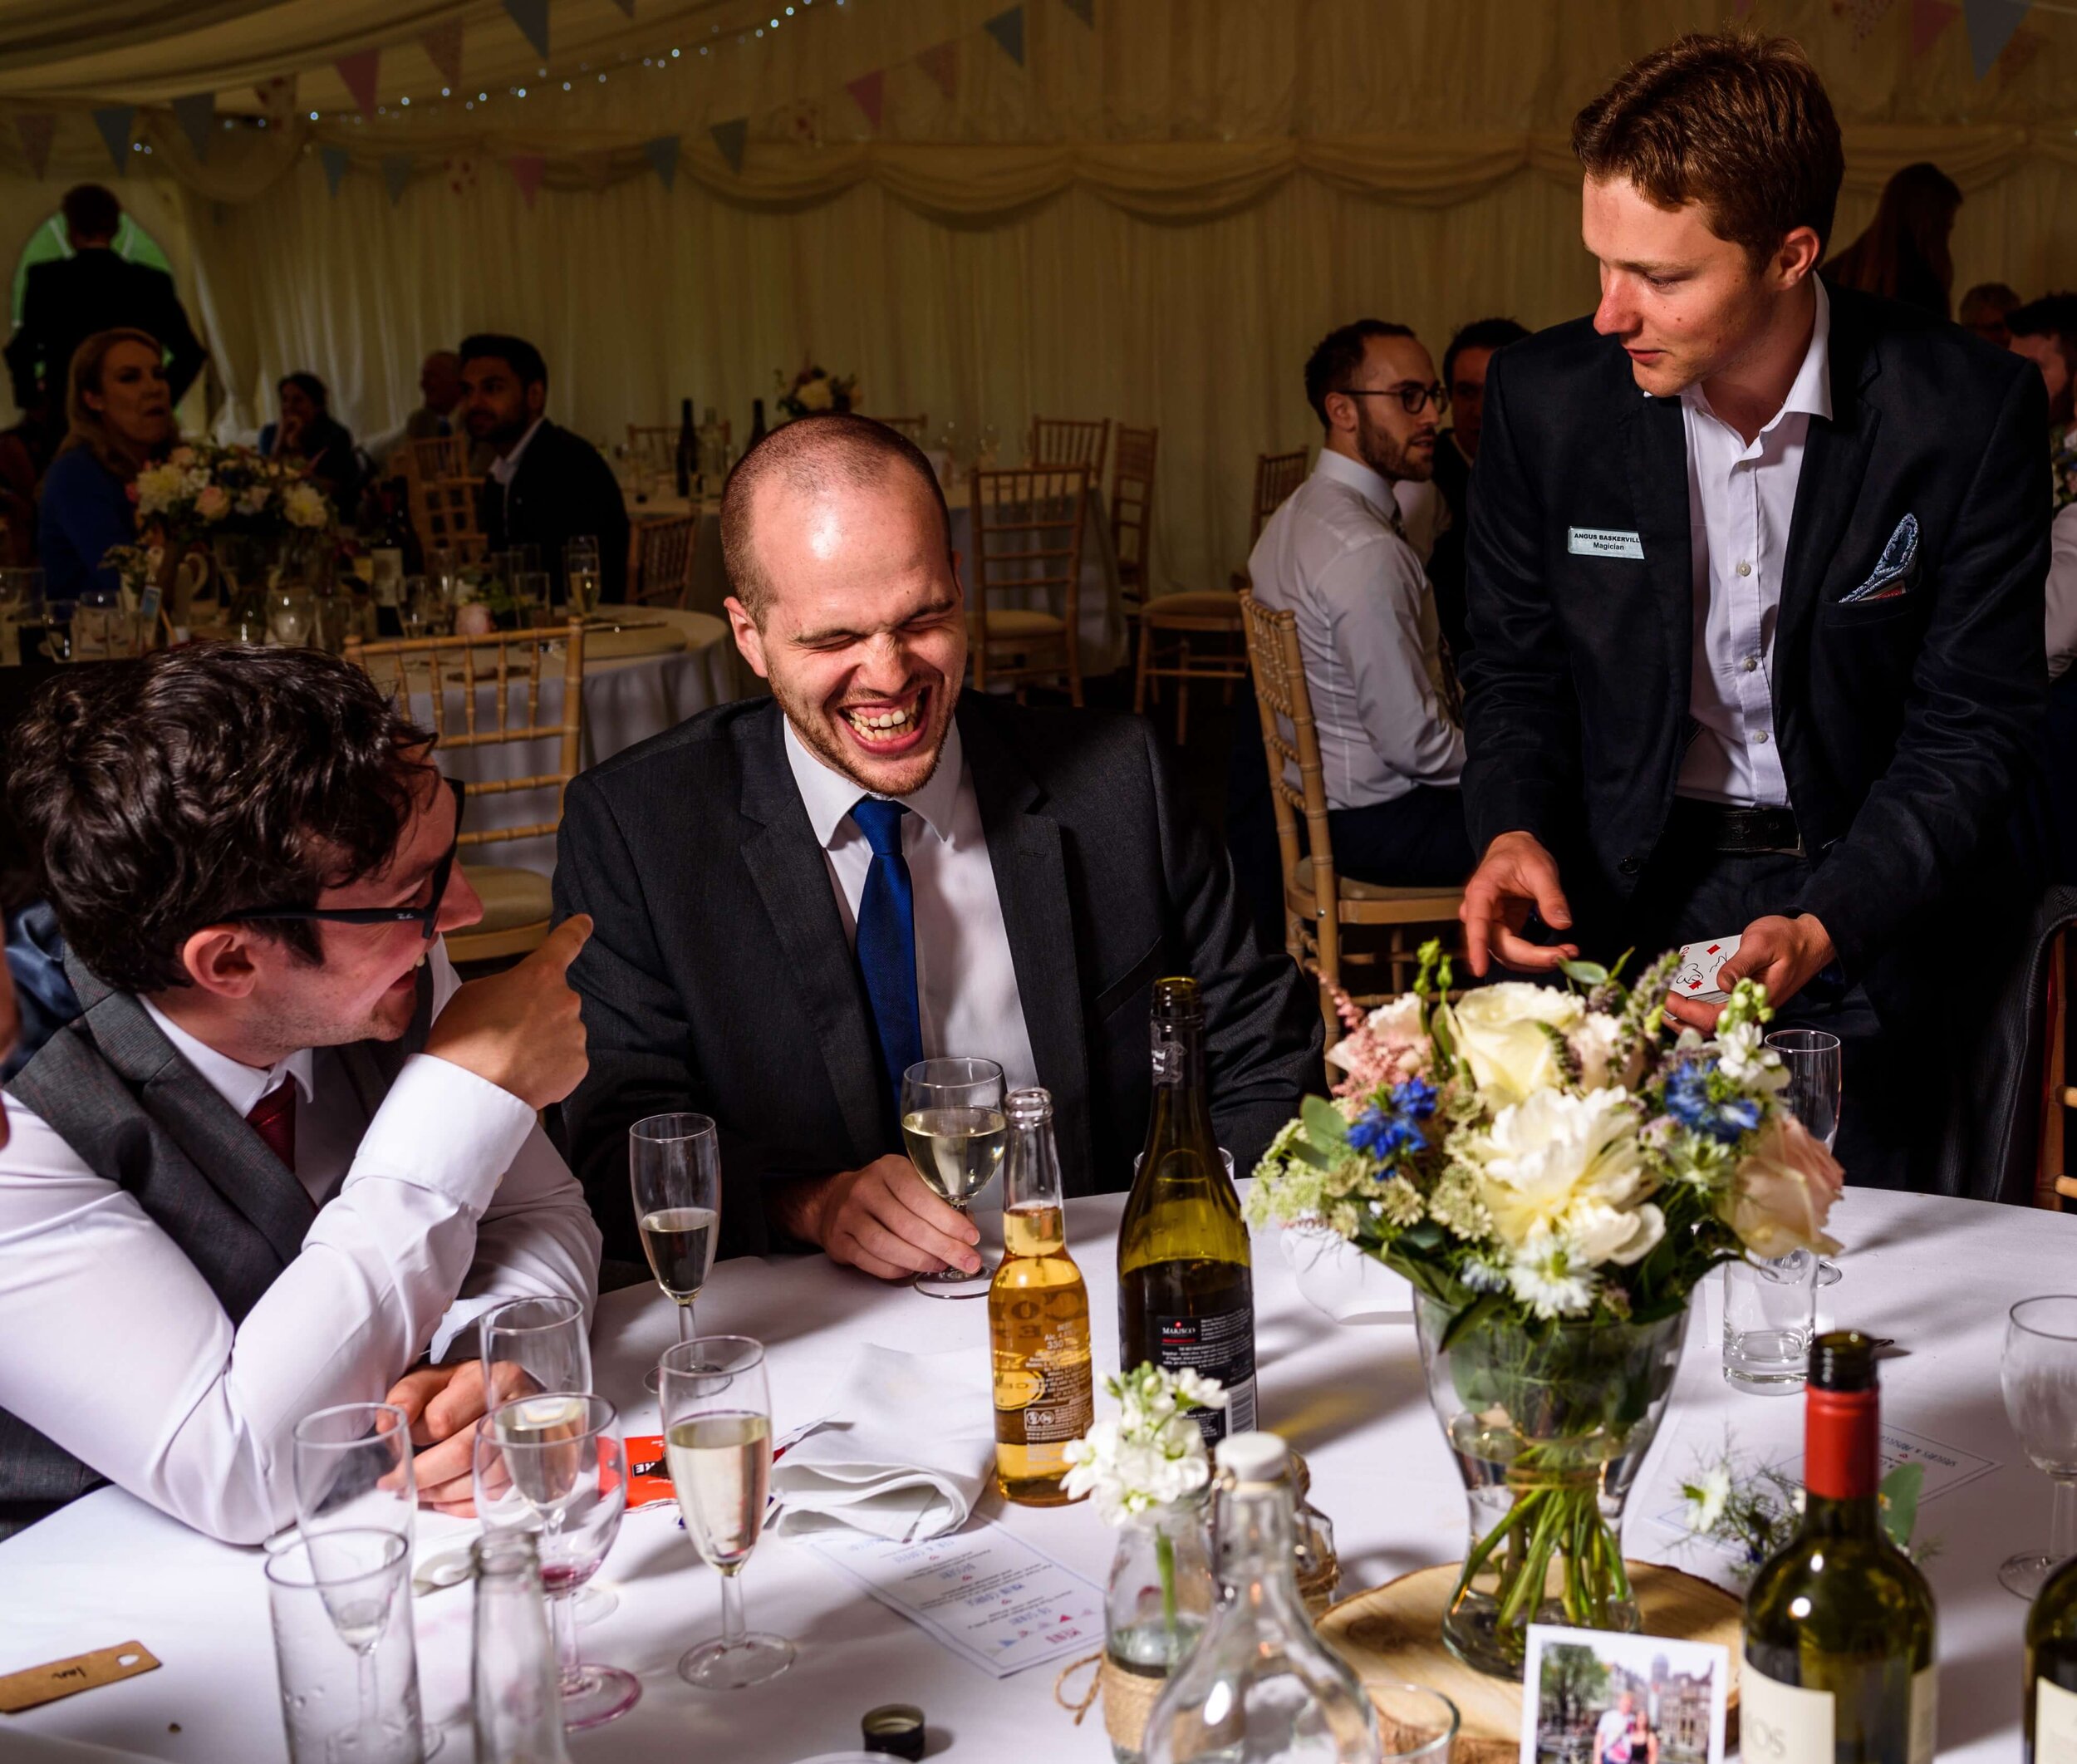  Wedding Magician   Angus Baskerville    see more  